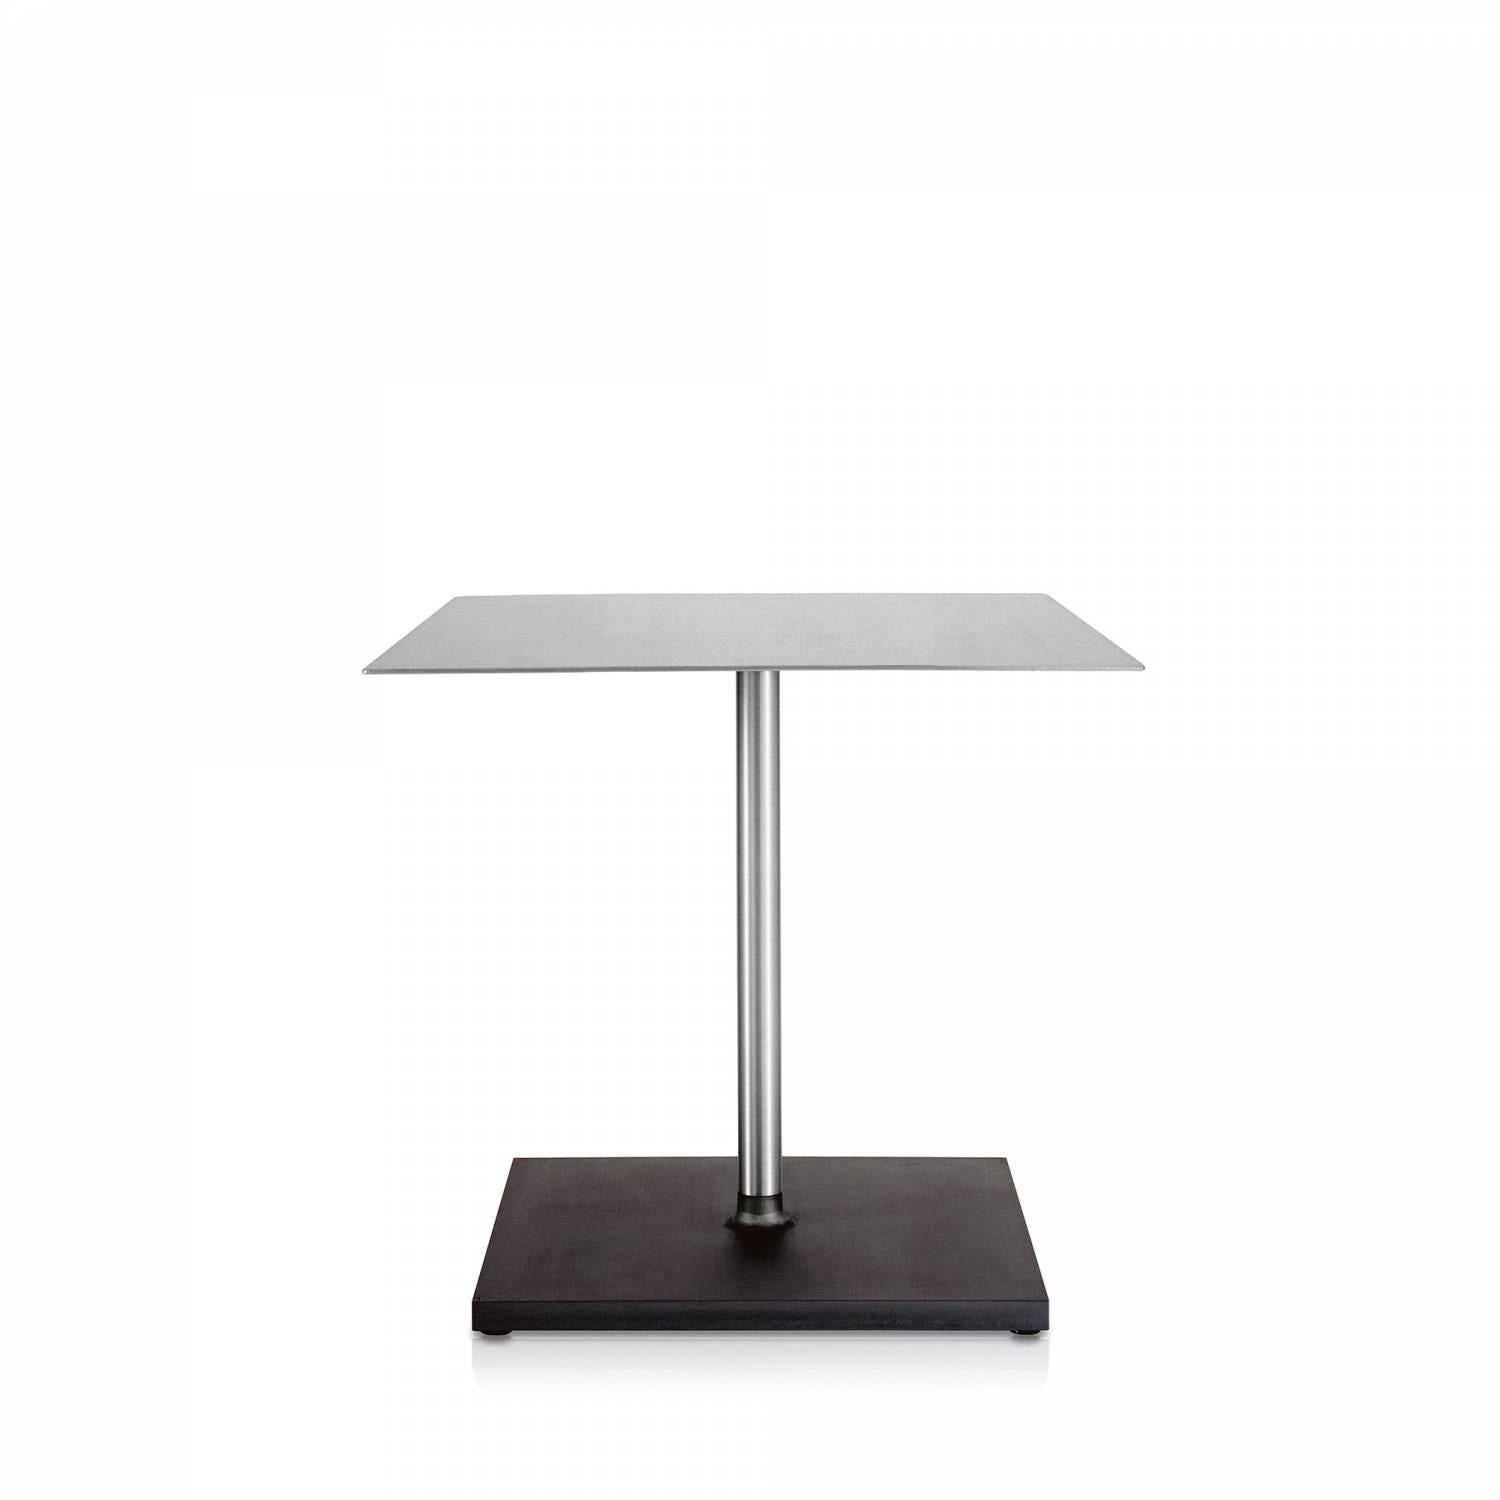 Handmade by Emeco craftsmen from 80% recycled aluminum, the brushed aluminum top comes in two shapes. Base in cast aluminum.

Made of: Recycled Aluminum. Product is eco-friendly. Please inquire for additional colors, finishes, configurations and